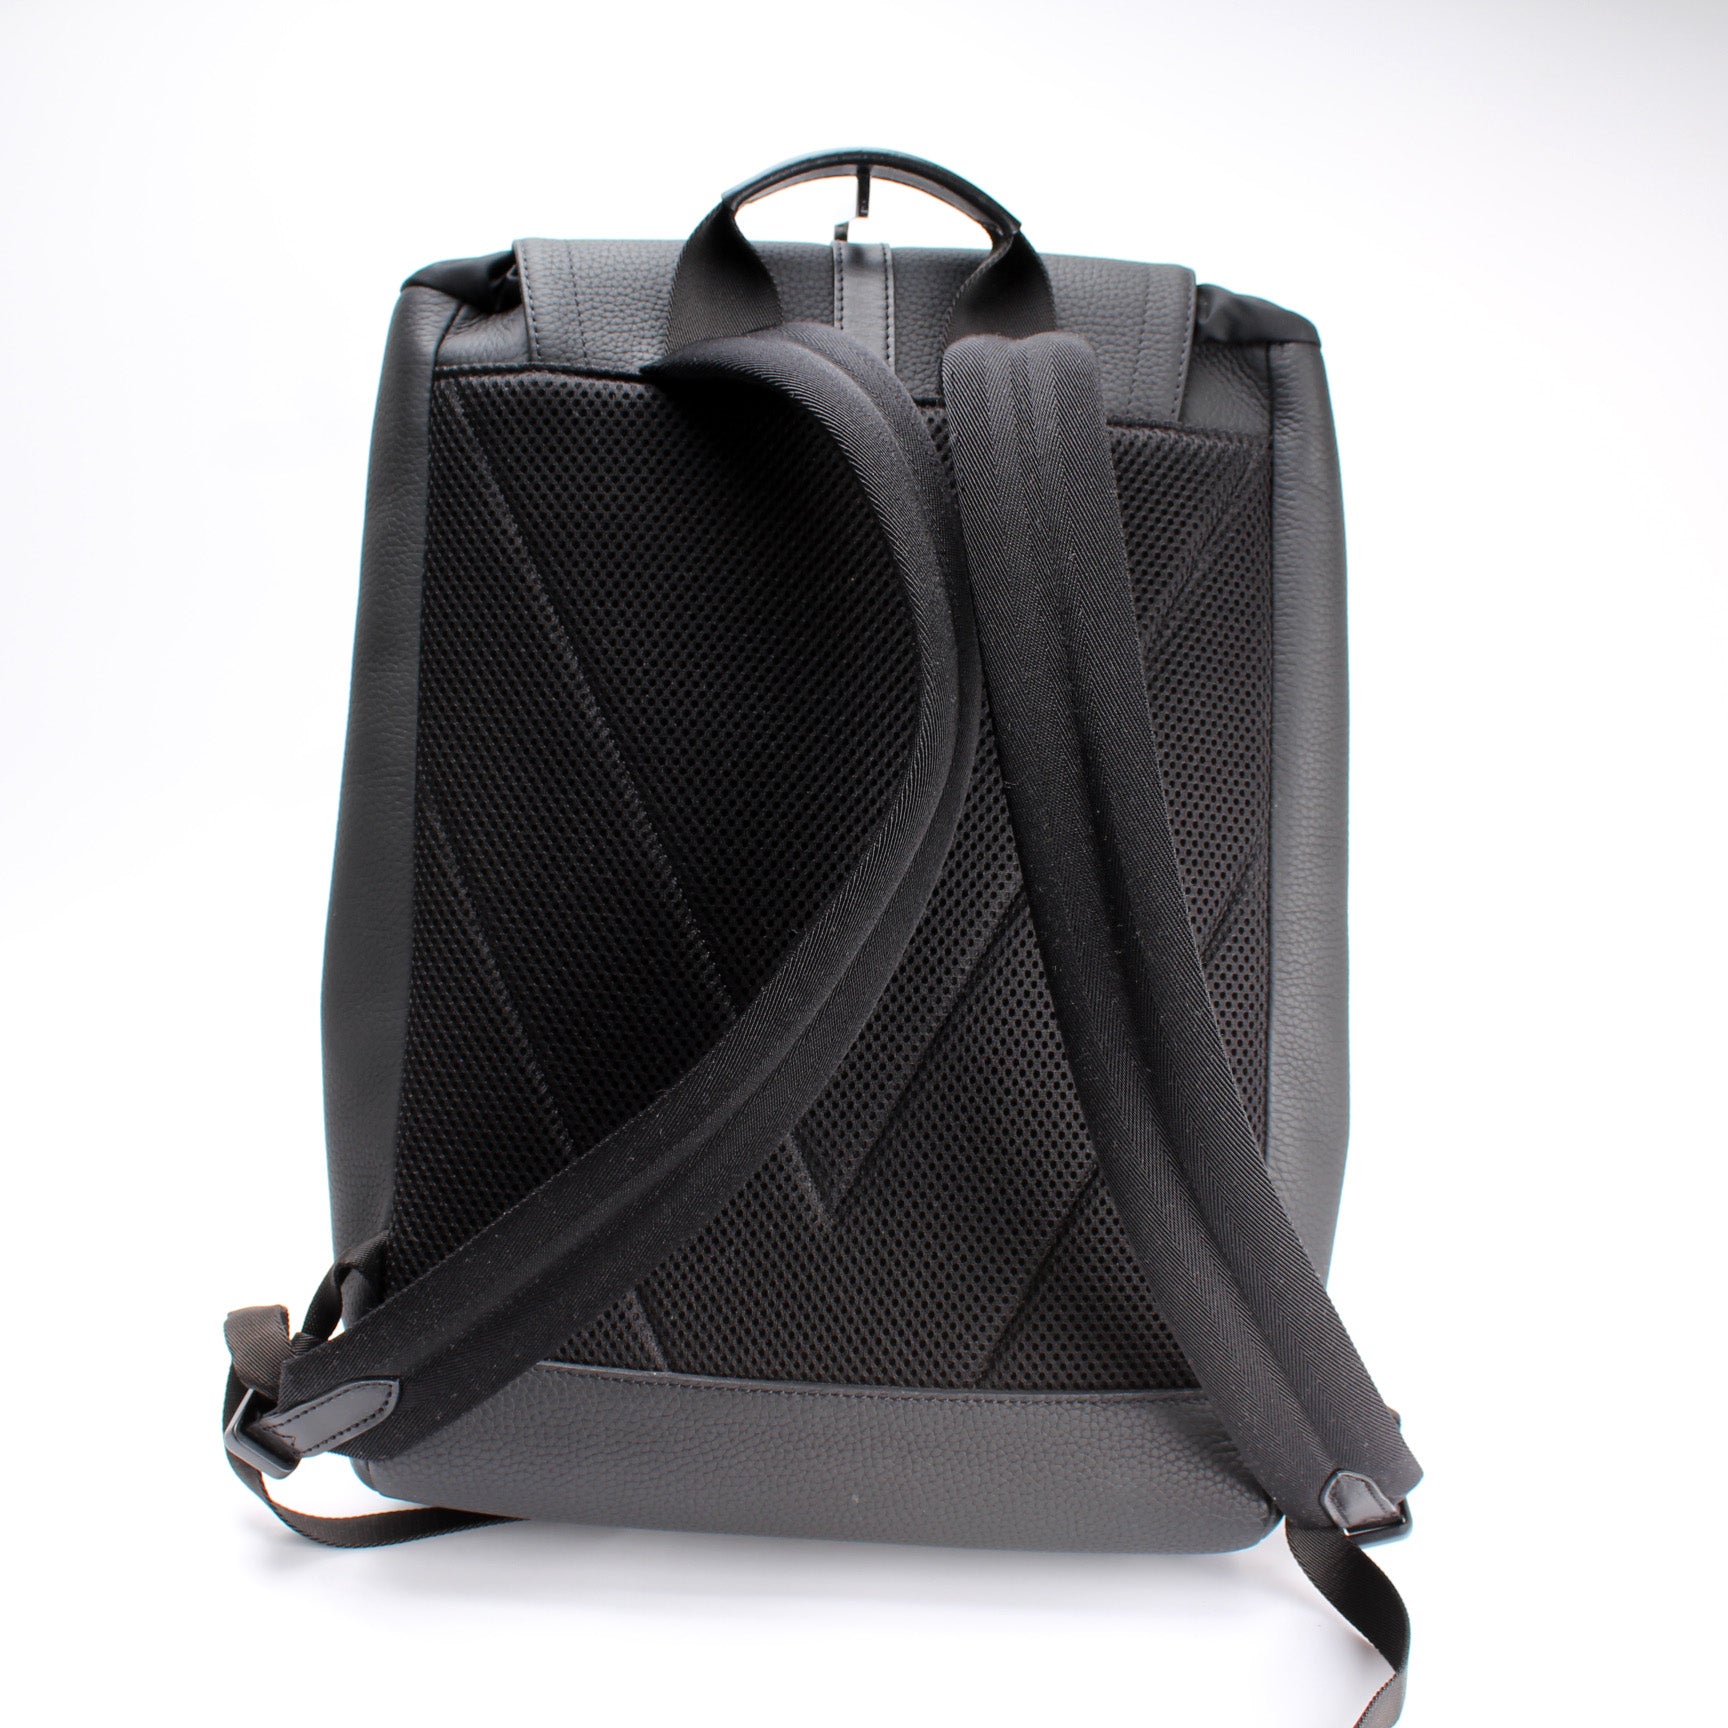 Shop Louis Vuitton Christopher slim backpack (M58644) by lifeisfun